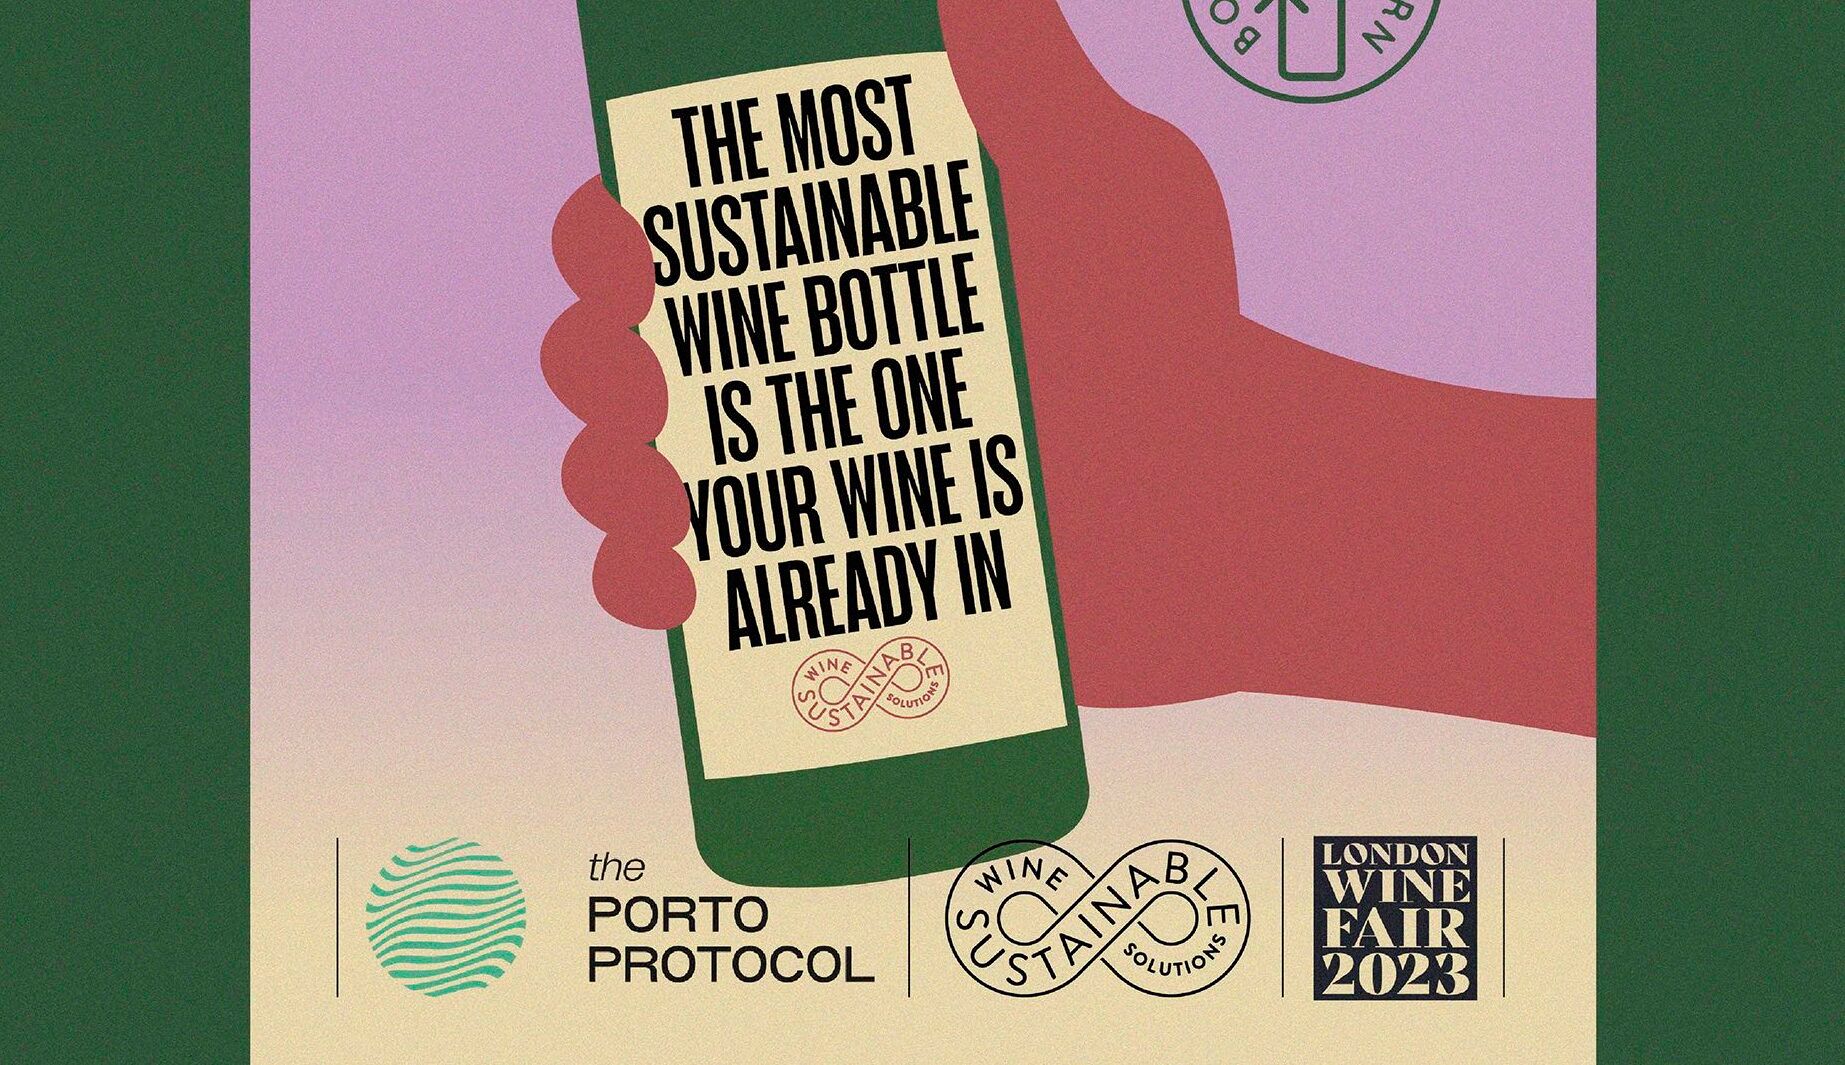 How London Wine Fair’s bottle reuse scheme is going to work